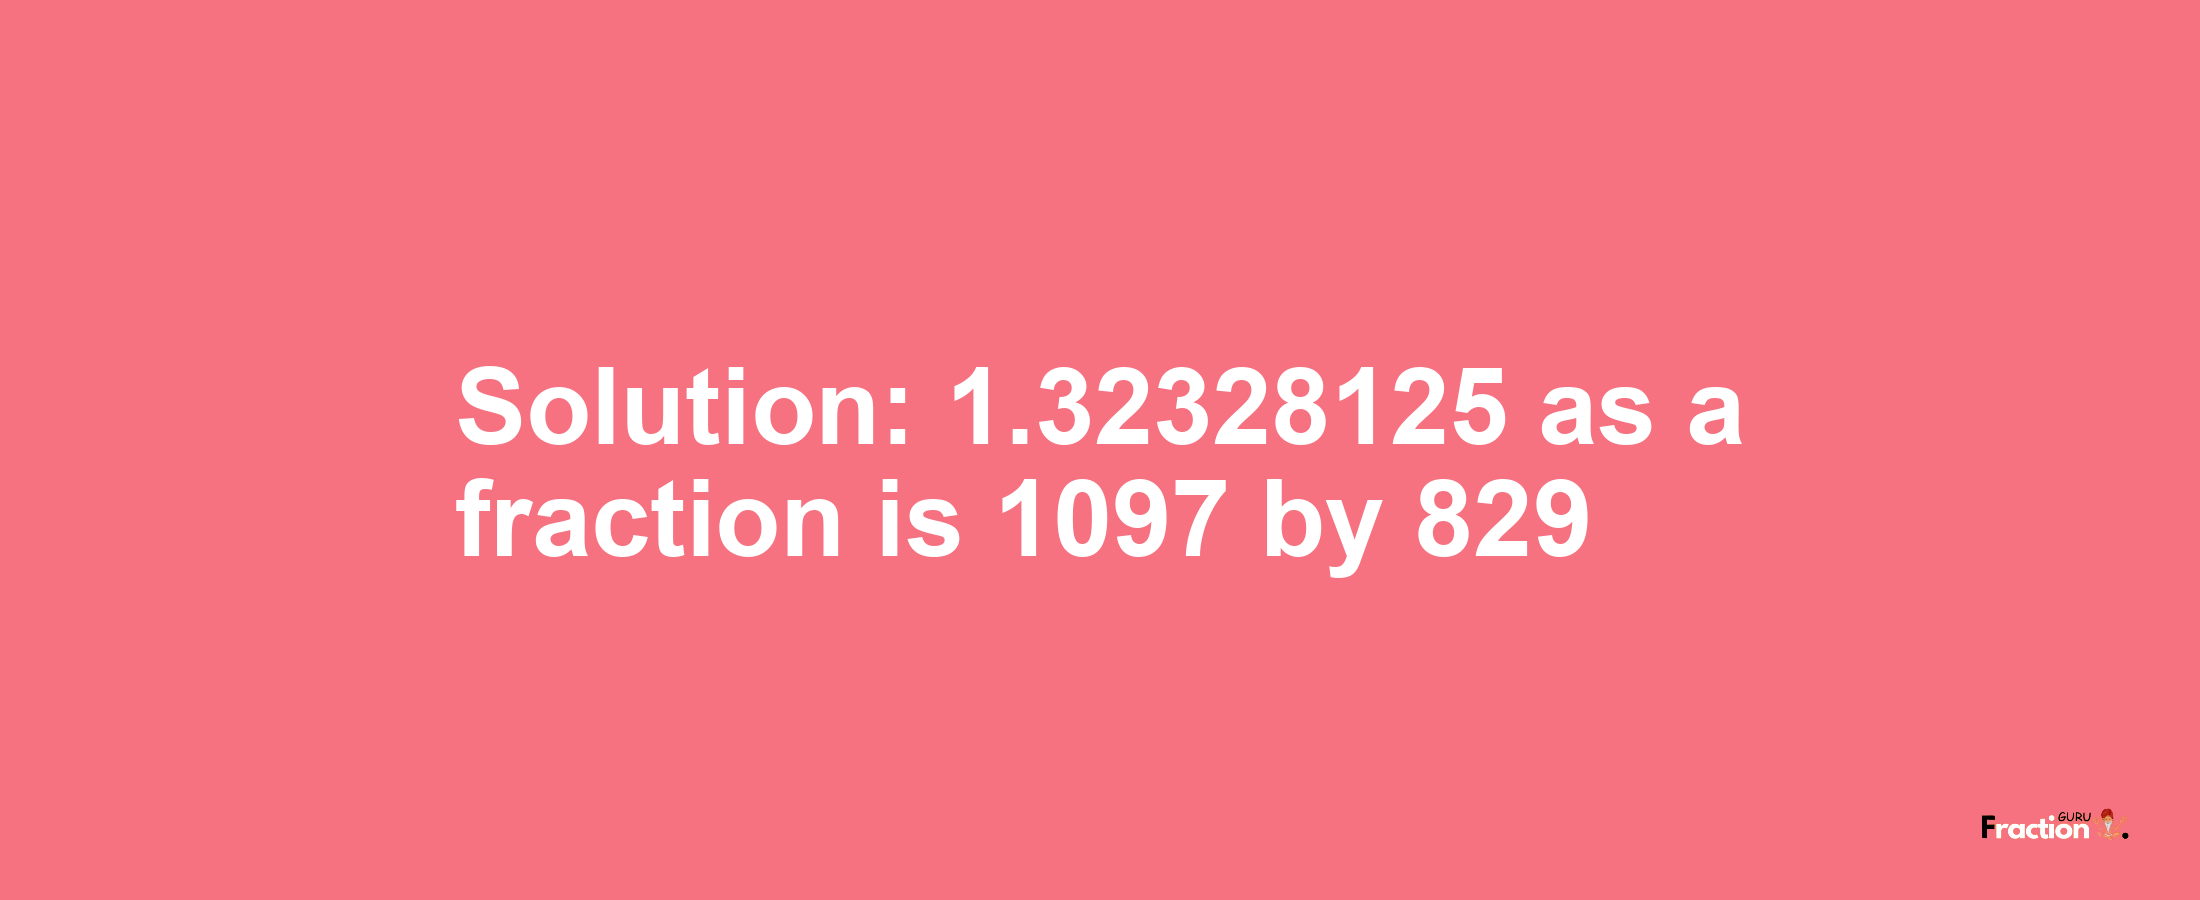 Solution:1.32328125 as a fraction is 1097/829